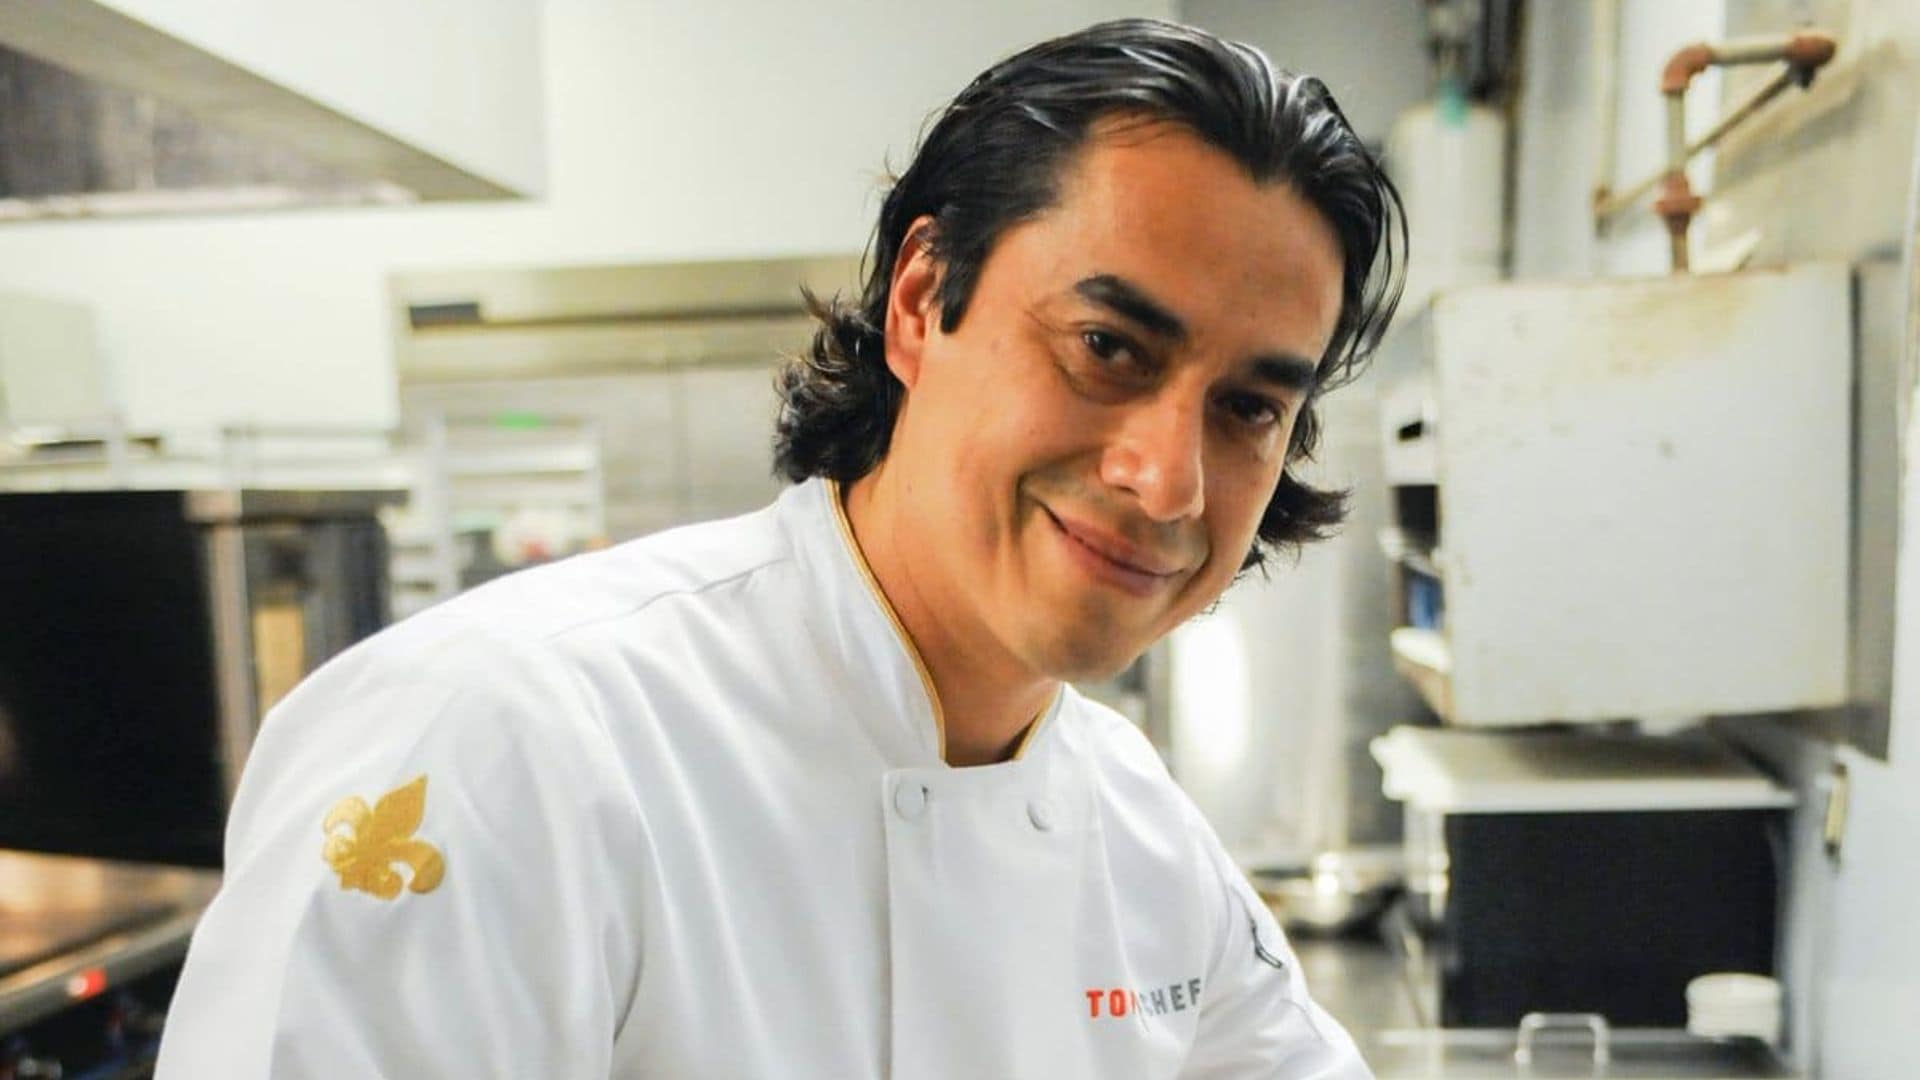 Carlos Gaytán went from being a dishwasher to become the first Mexican chef to win a Michelin Star